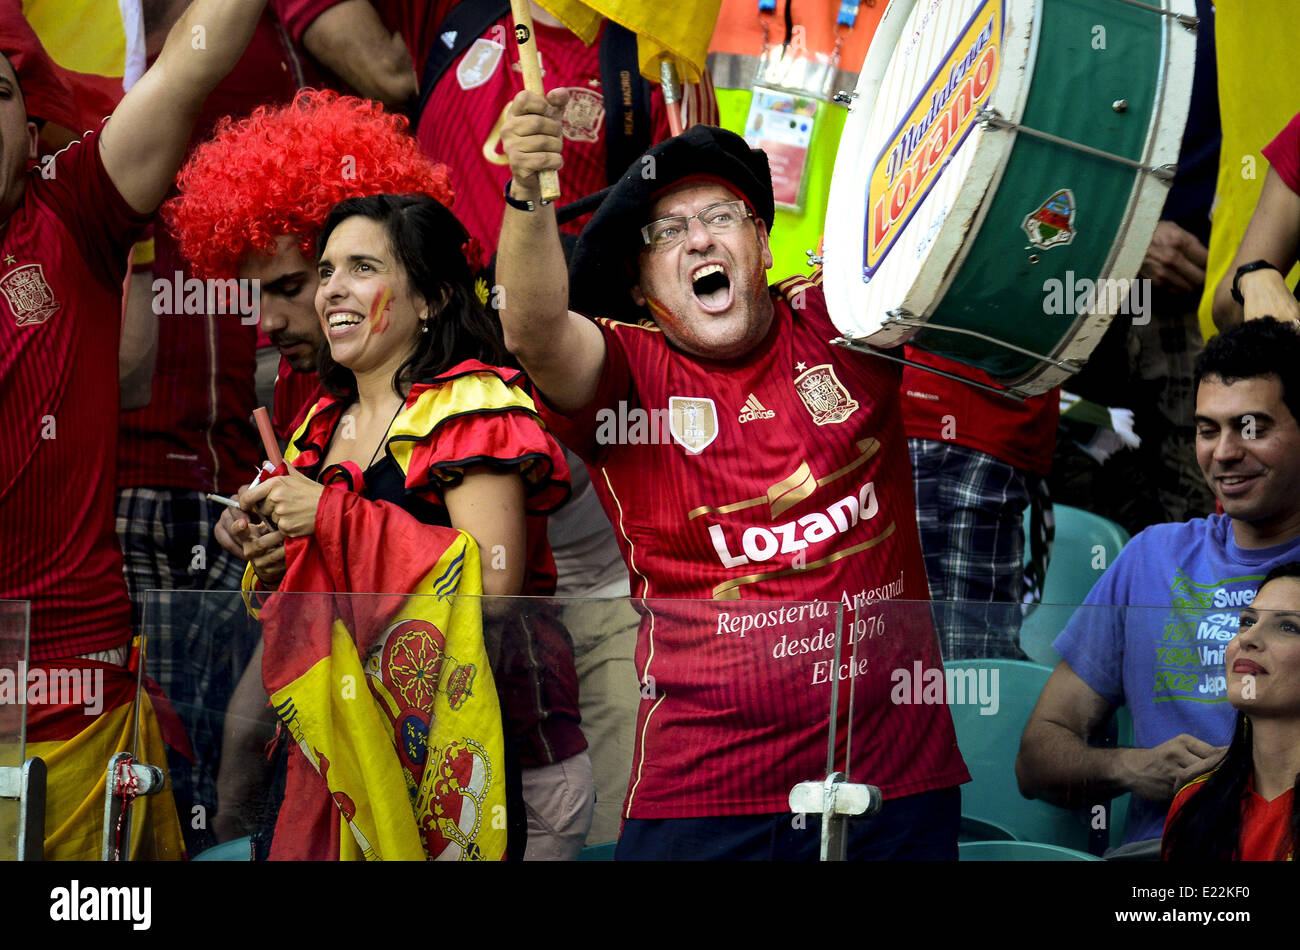 Salvador, Brazil. 13th June, 2014. Spain's fan celebrates Xabi Alonso's goal, in the penalty kick, to score 1-0 Spain over Netherlands in Salvador, for the #3 match of the 2014 World Cup Credit:  Gustavo Basso/NurPhoto/ZUMAPRESS.com/Alamy Live News Stock Photo